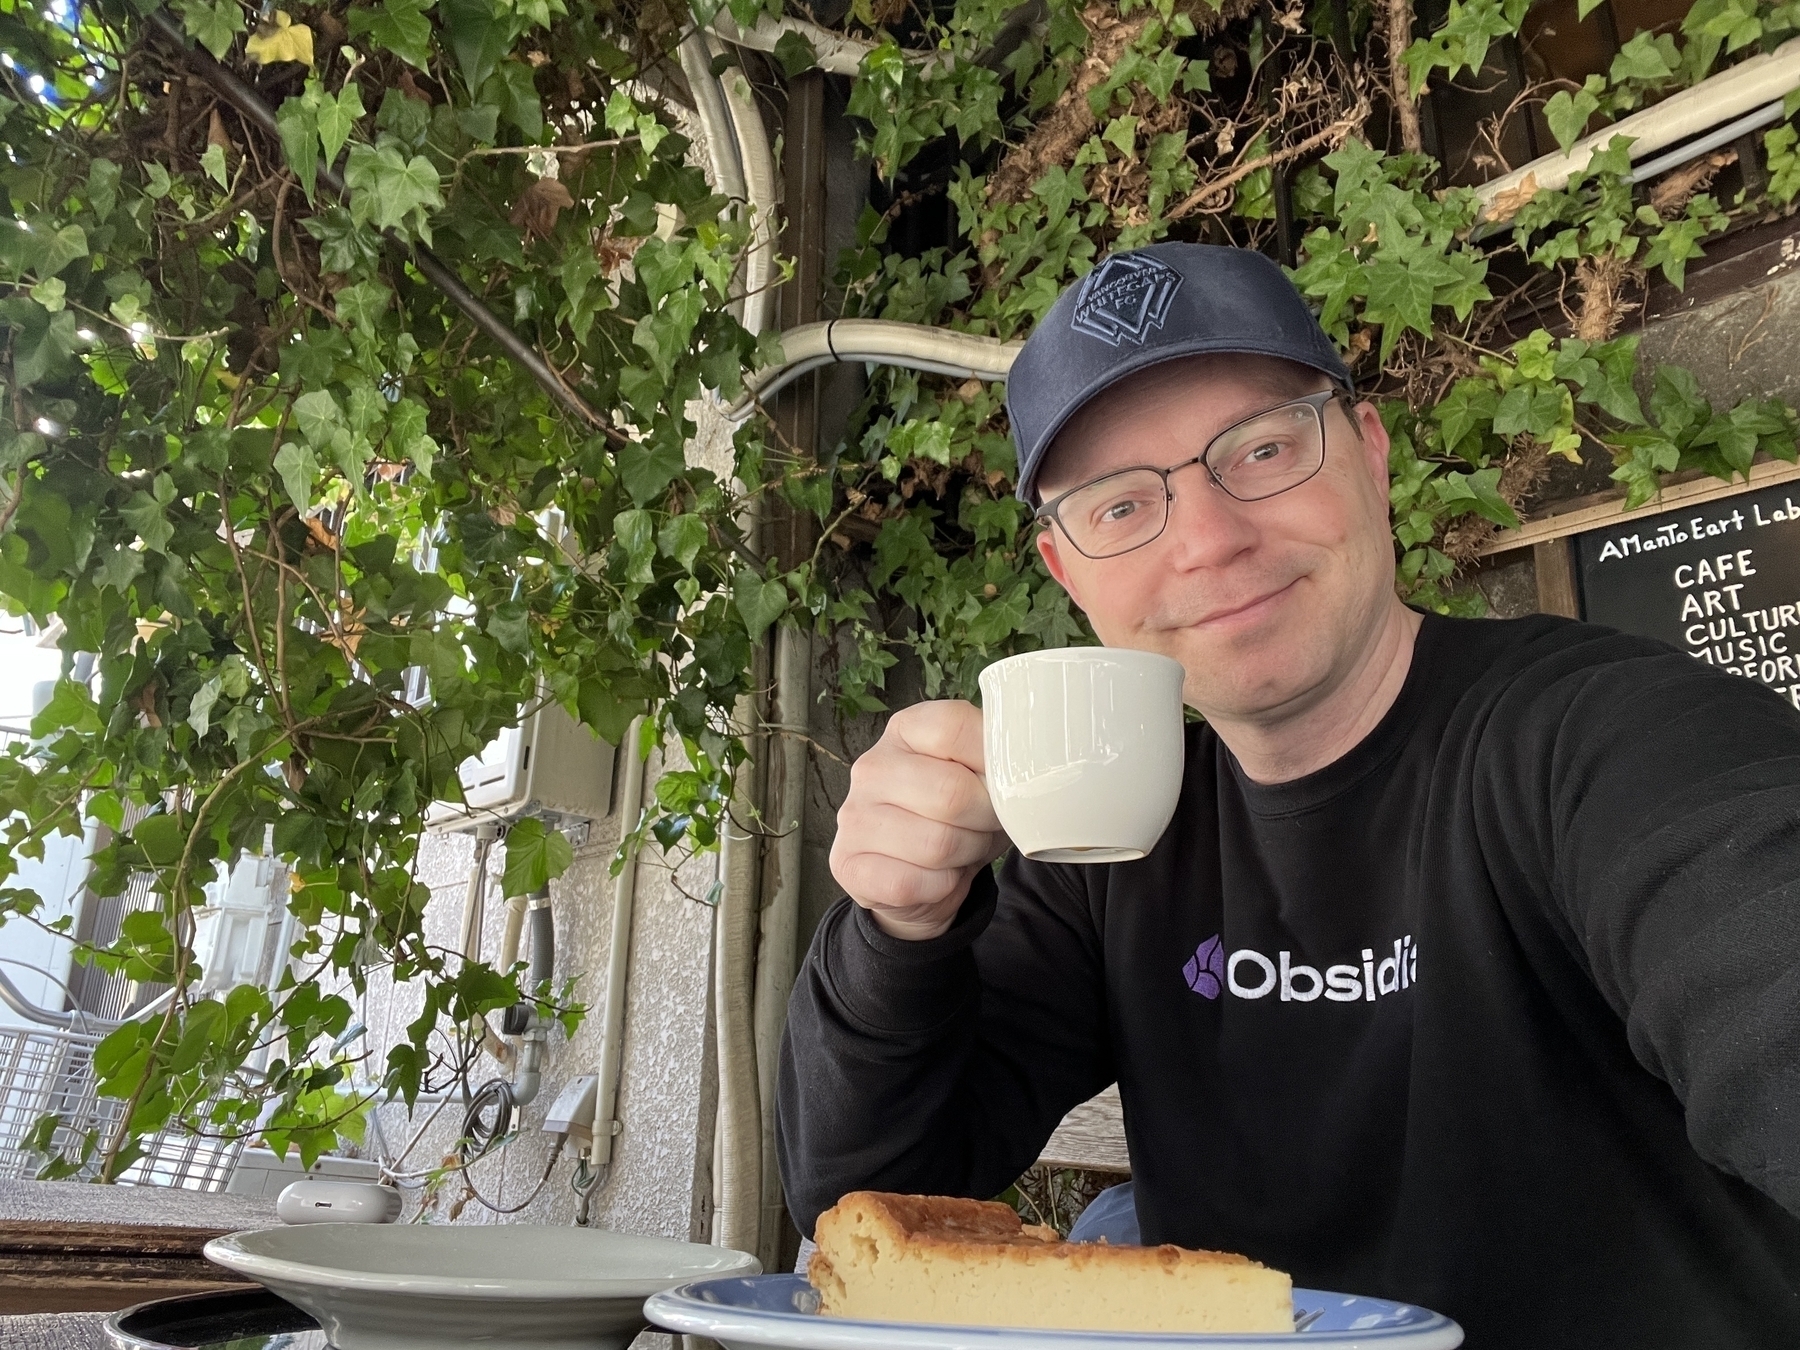 Chad sits outside of a cafe under a trestle covered in vines with a cup of coffee and slab of cheesecake